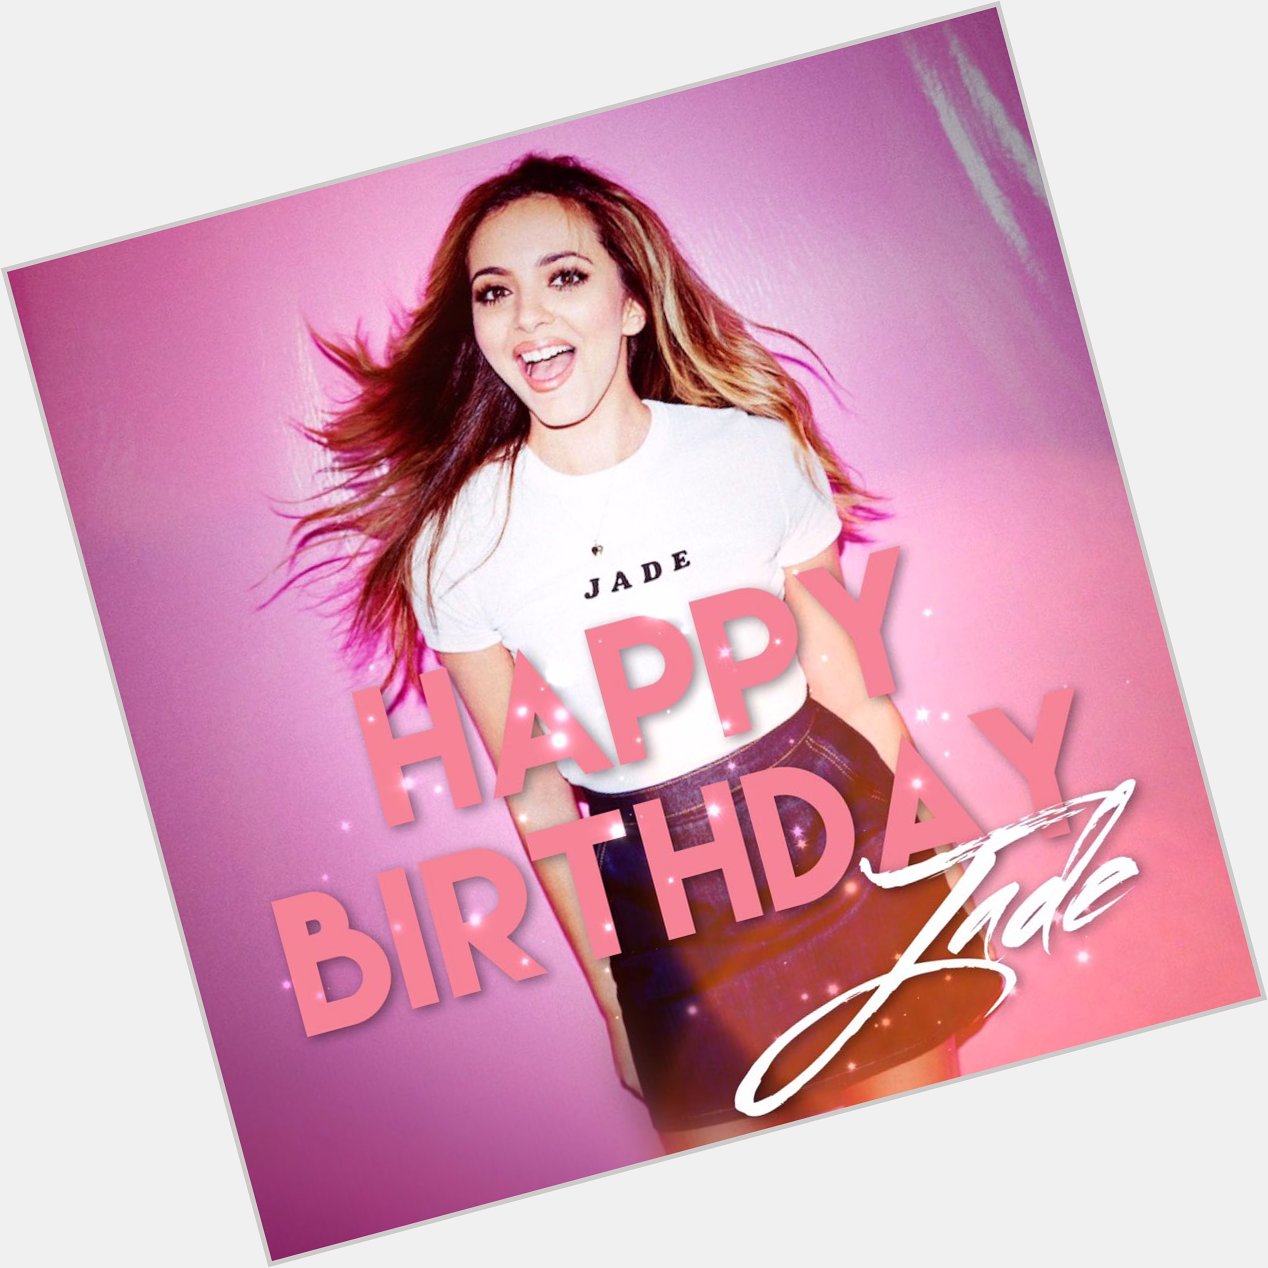 Happy Birthday to Jade Thirlwall who\s 23 today! We hope you have an amazing day!   